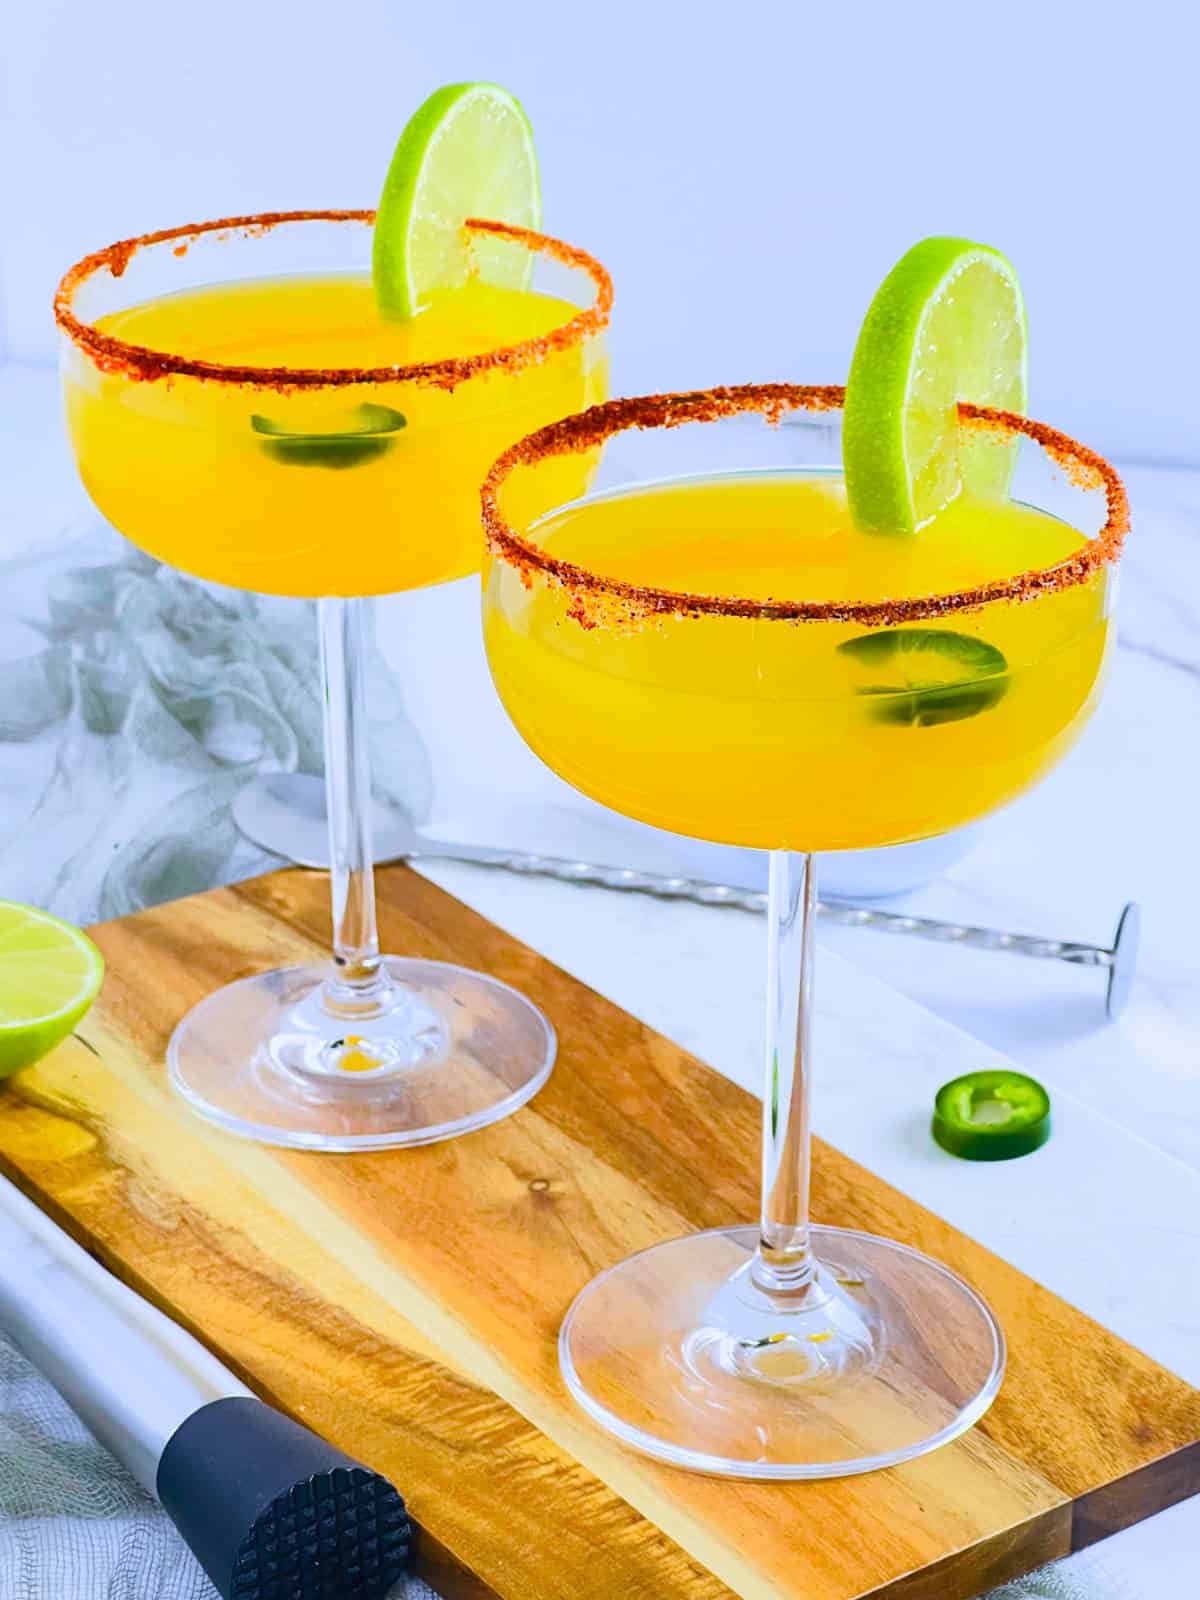 Spicy mango margarita placed on a wooden board with jalapeno and lime.